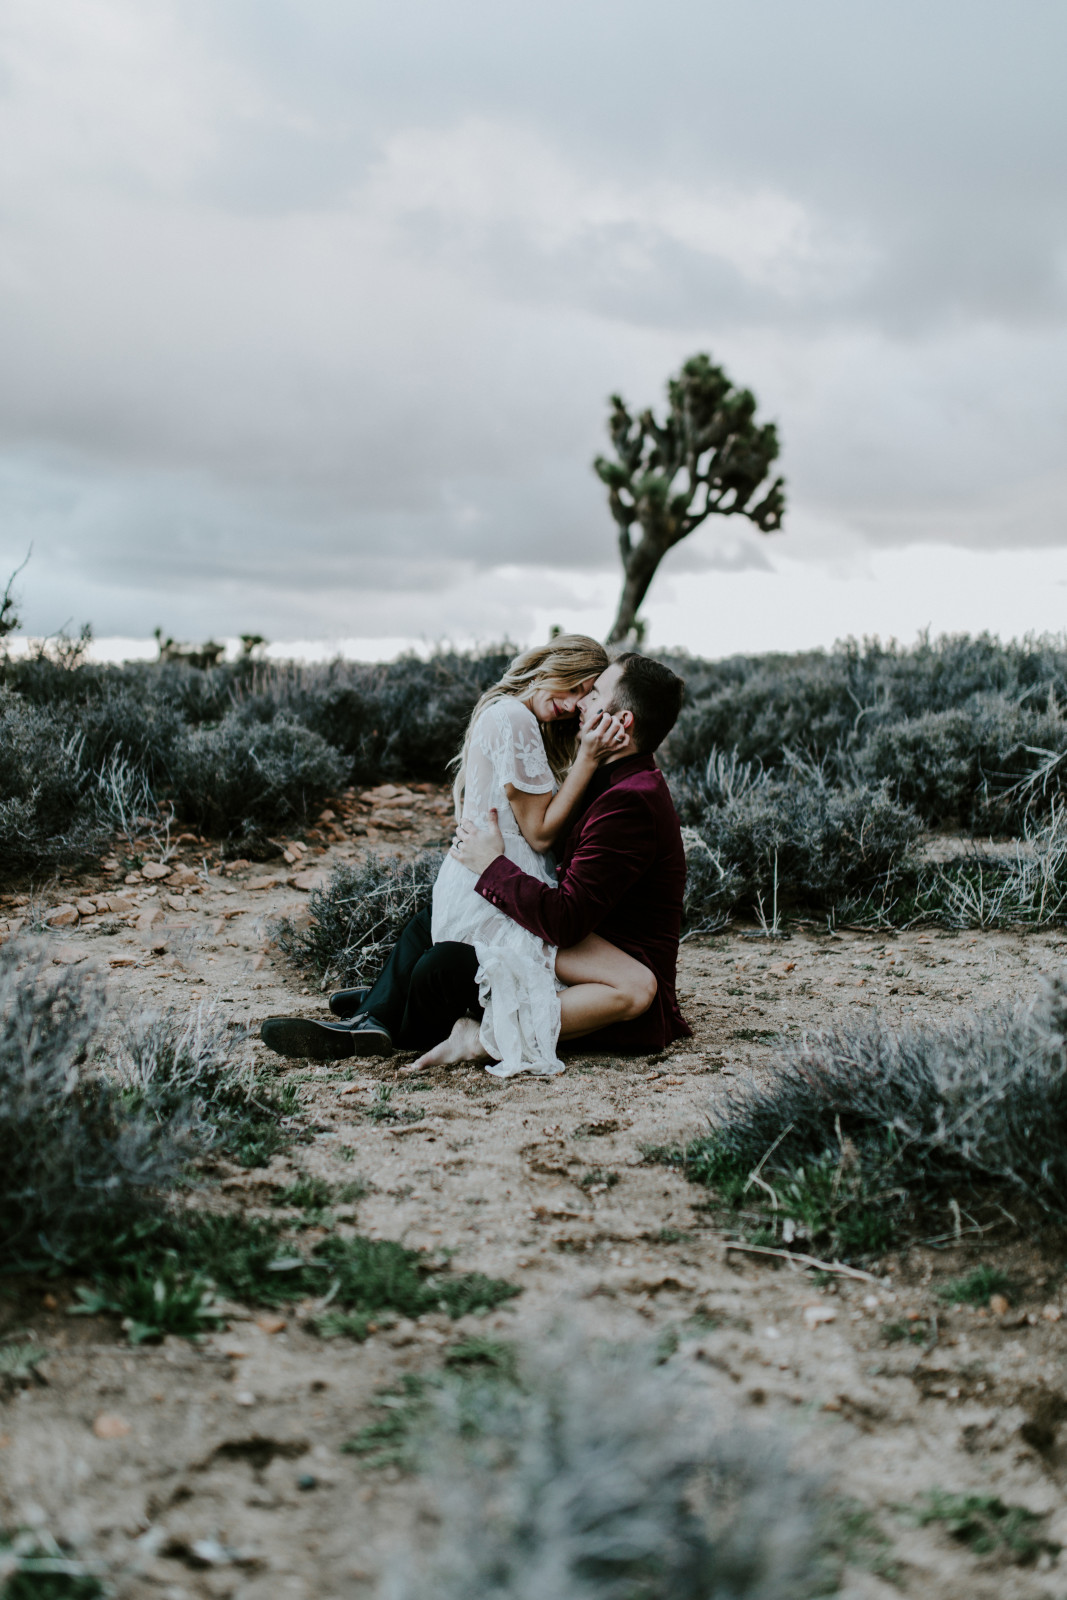 Alyssa and Jeremy kiss as they sit on the sand at Joshua Tree. Elopement wedding photography at Joshua Tree National Park by Sienna Plus Josh.